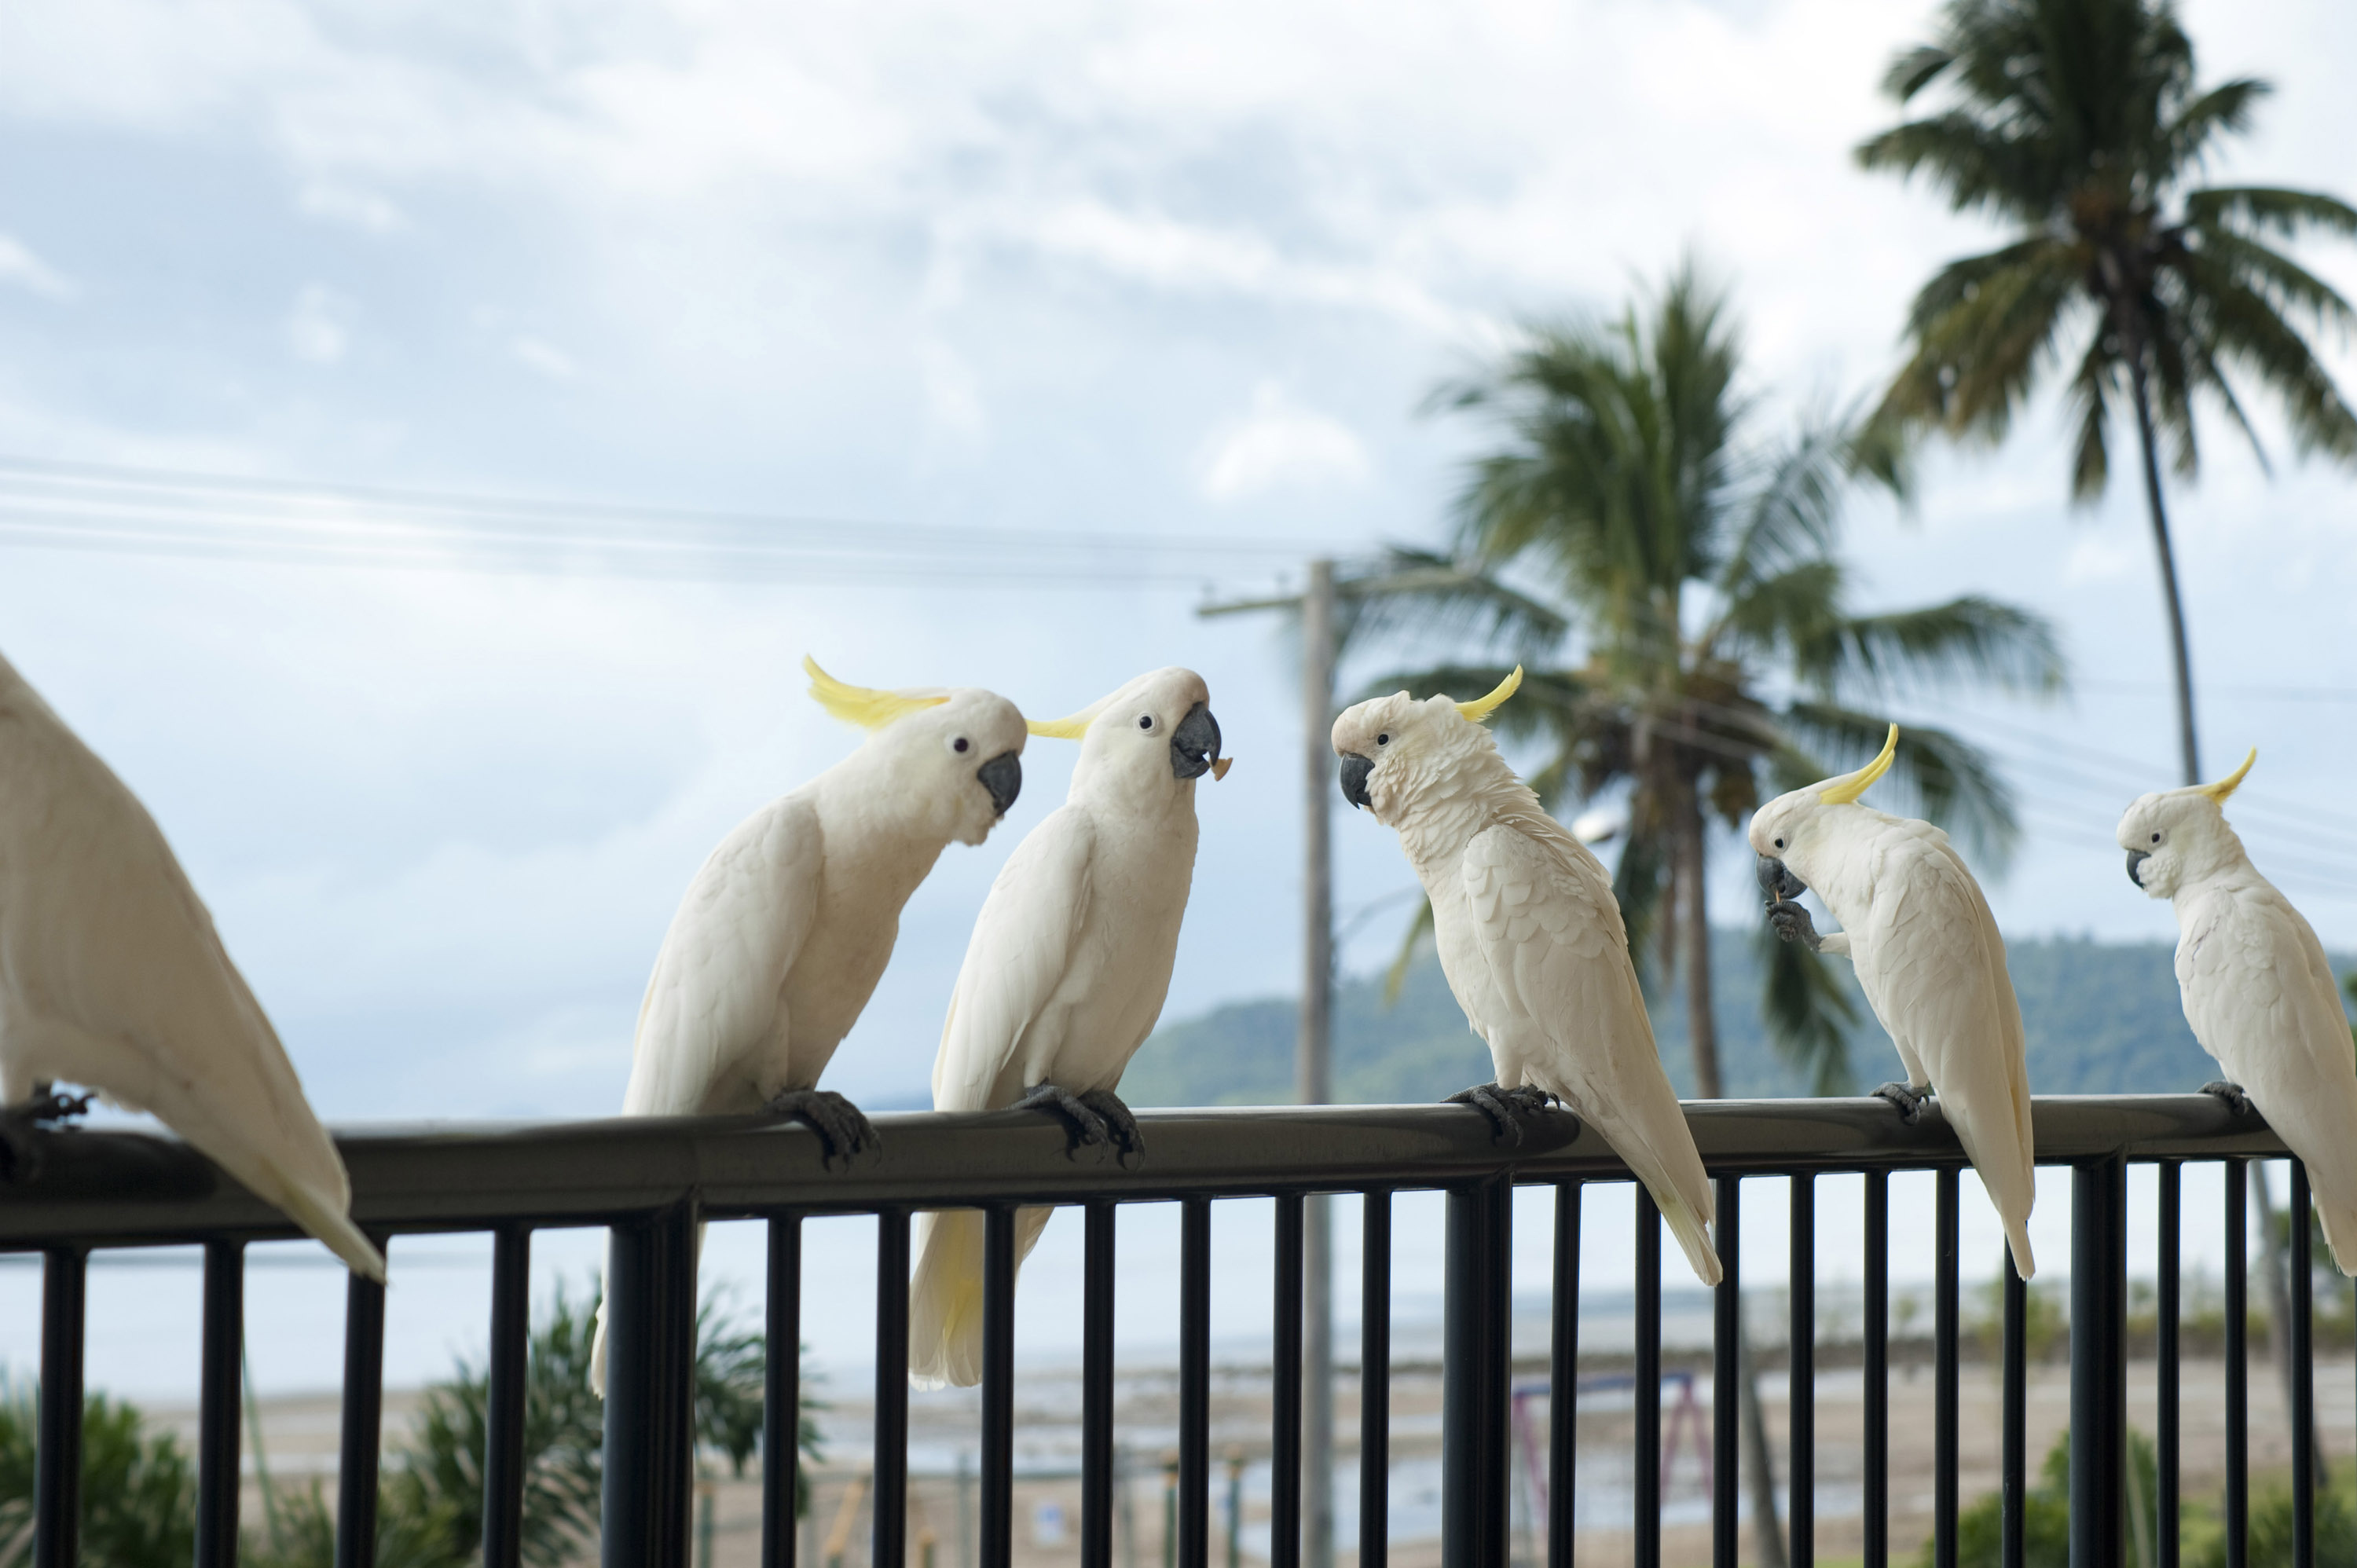 Cockatoo: A Flock Of White Crested Cockatoos In Tropics. 3000x2000 HD Wallpaper.